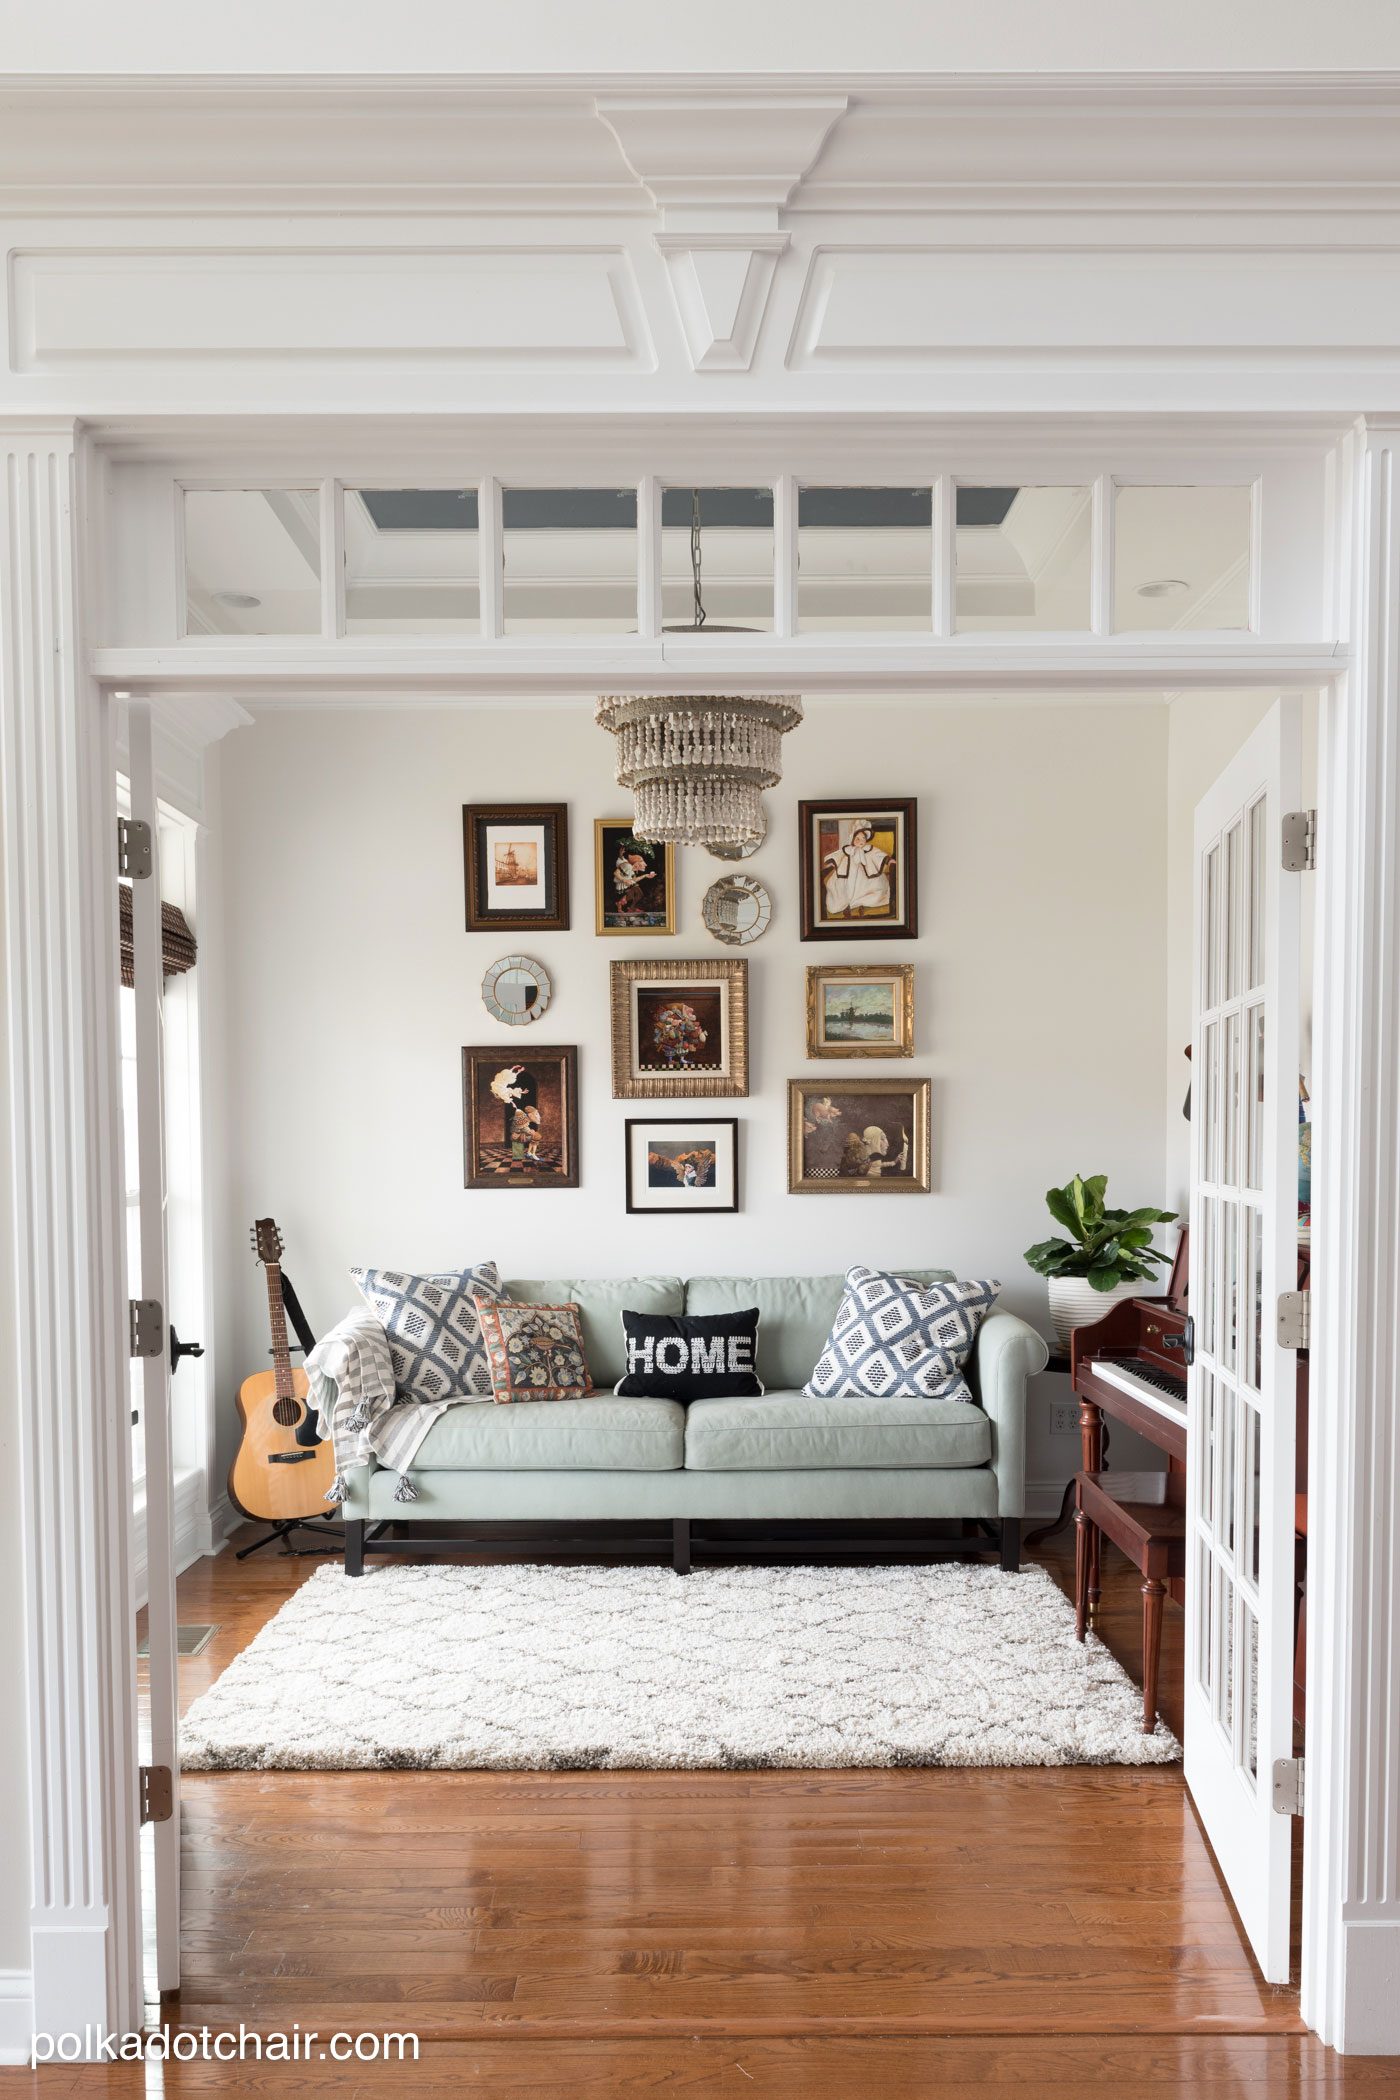 Learn how to easily change your door hardware and get lots of ideas for redecorating your home office or music room. Ideas for creating a gallery wall, a painted ceiling and lots of before and after photos!